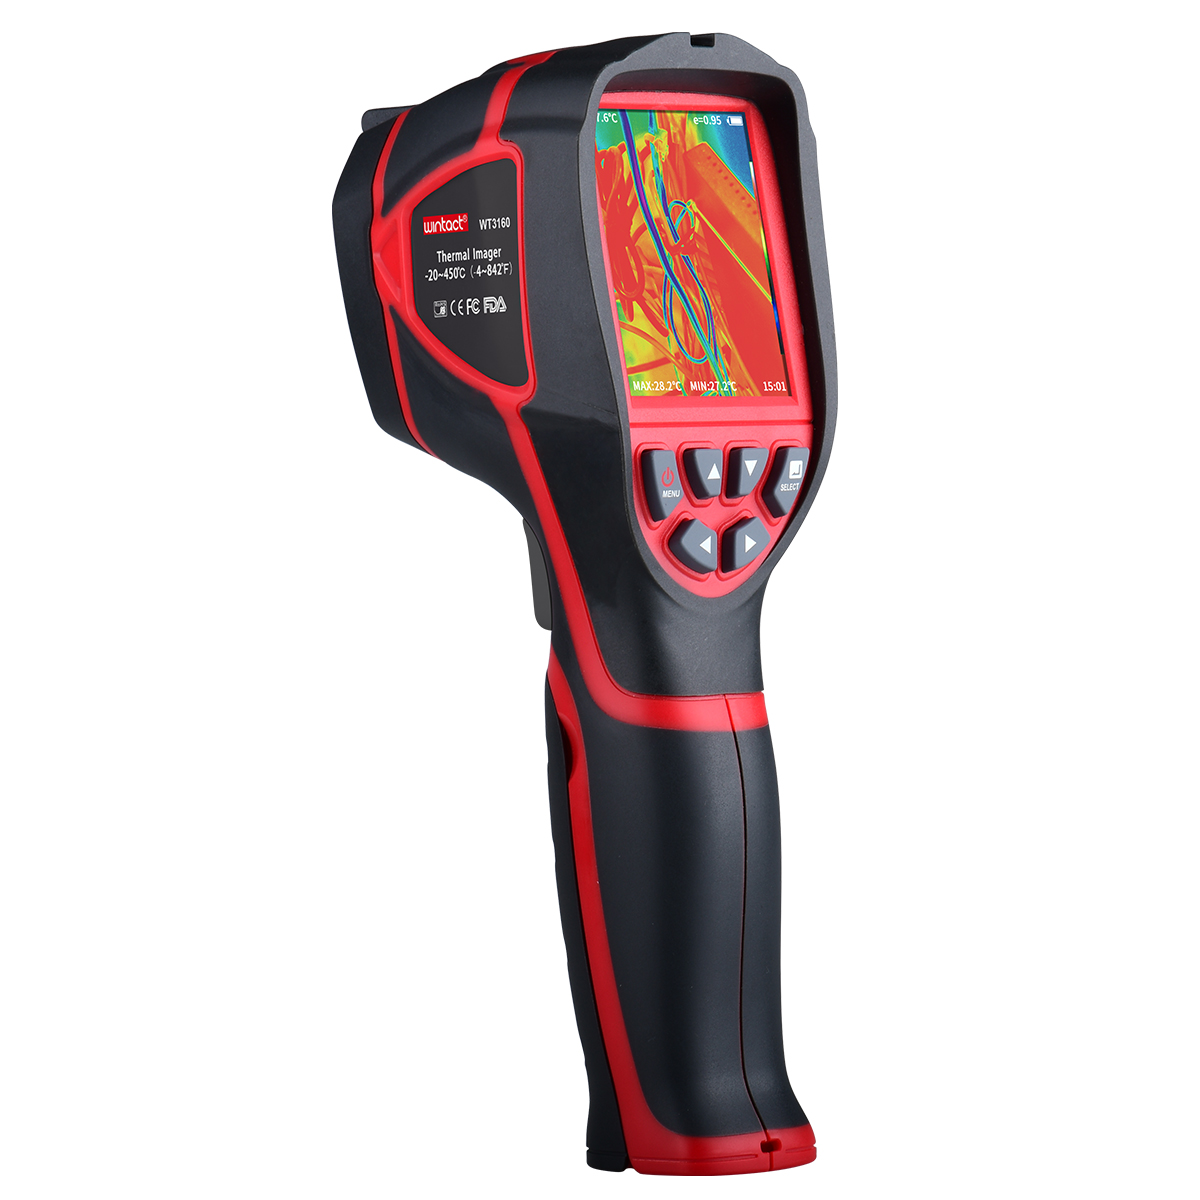 Handheld Infrared Thermal Imaging Inspection Camera 220x160 Resolution 2.8" LCD 